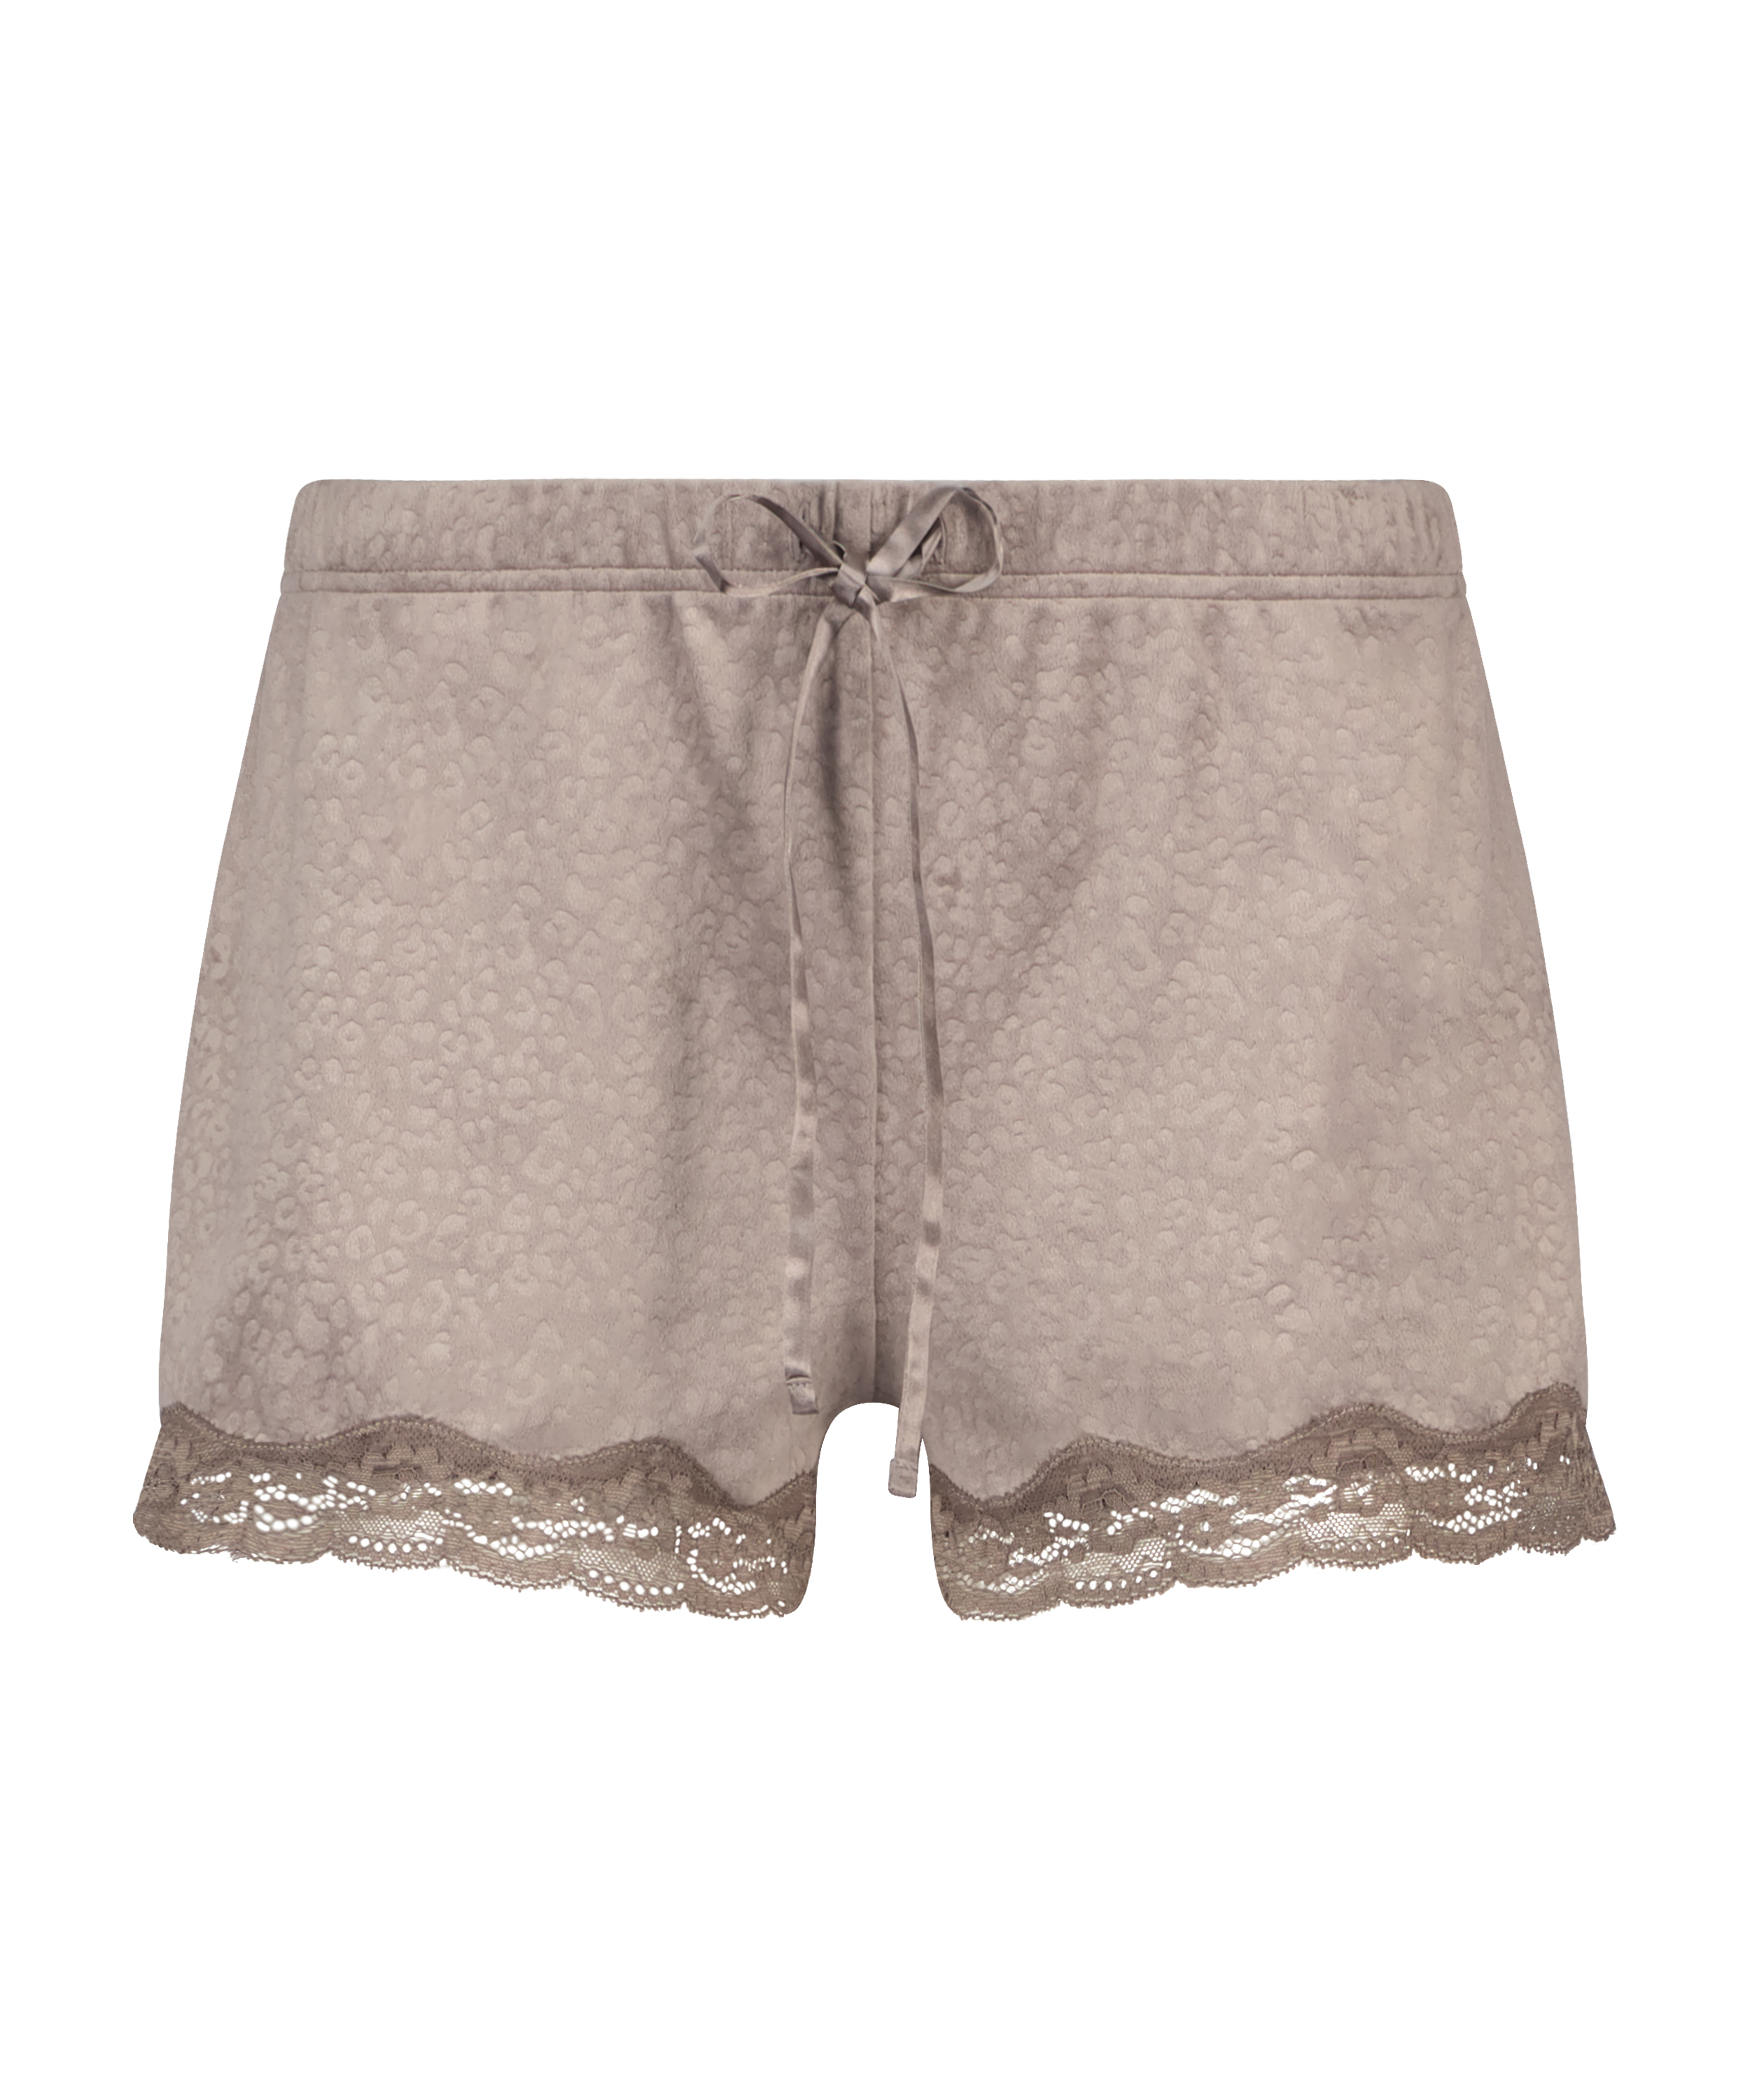 Velours Lace shorts, Brown, main